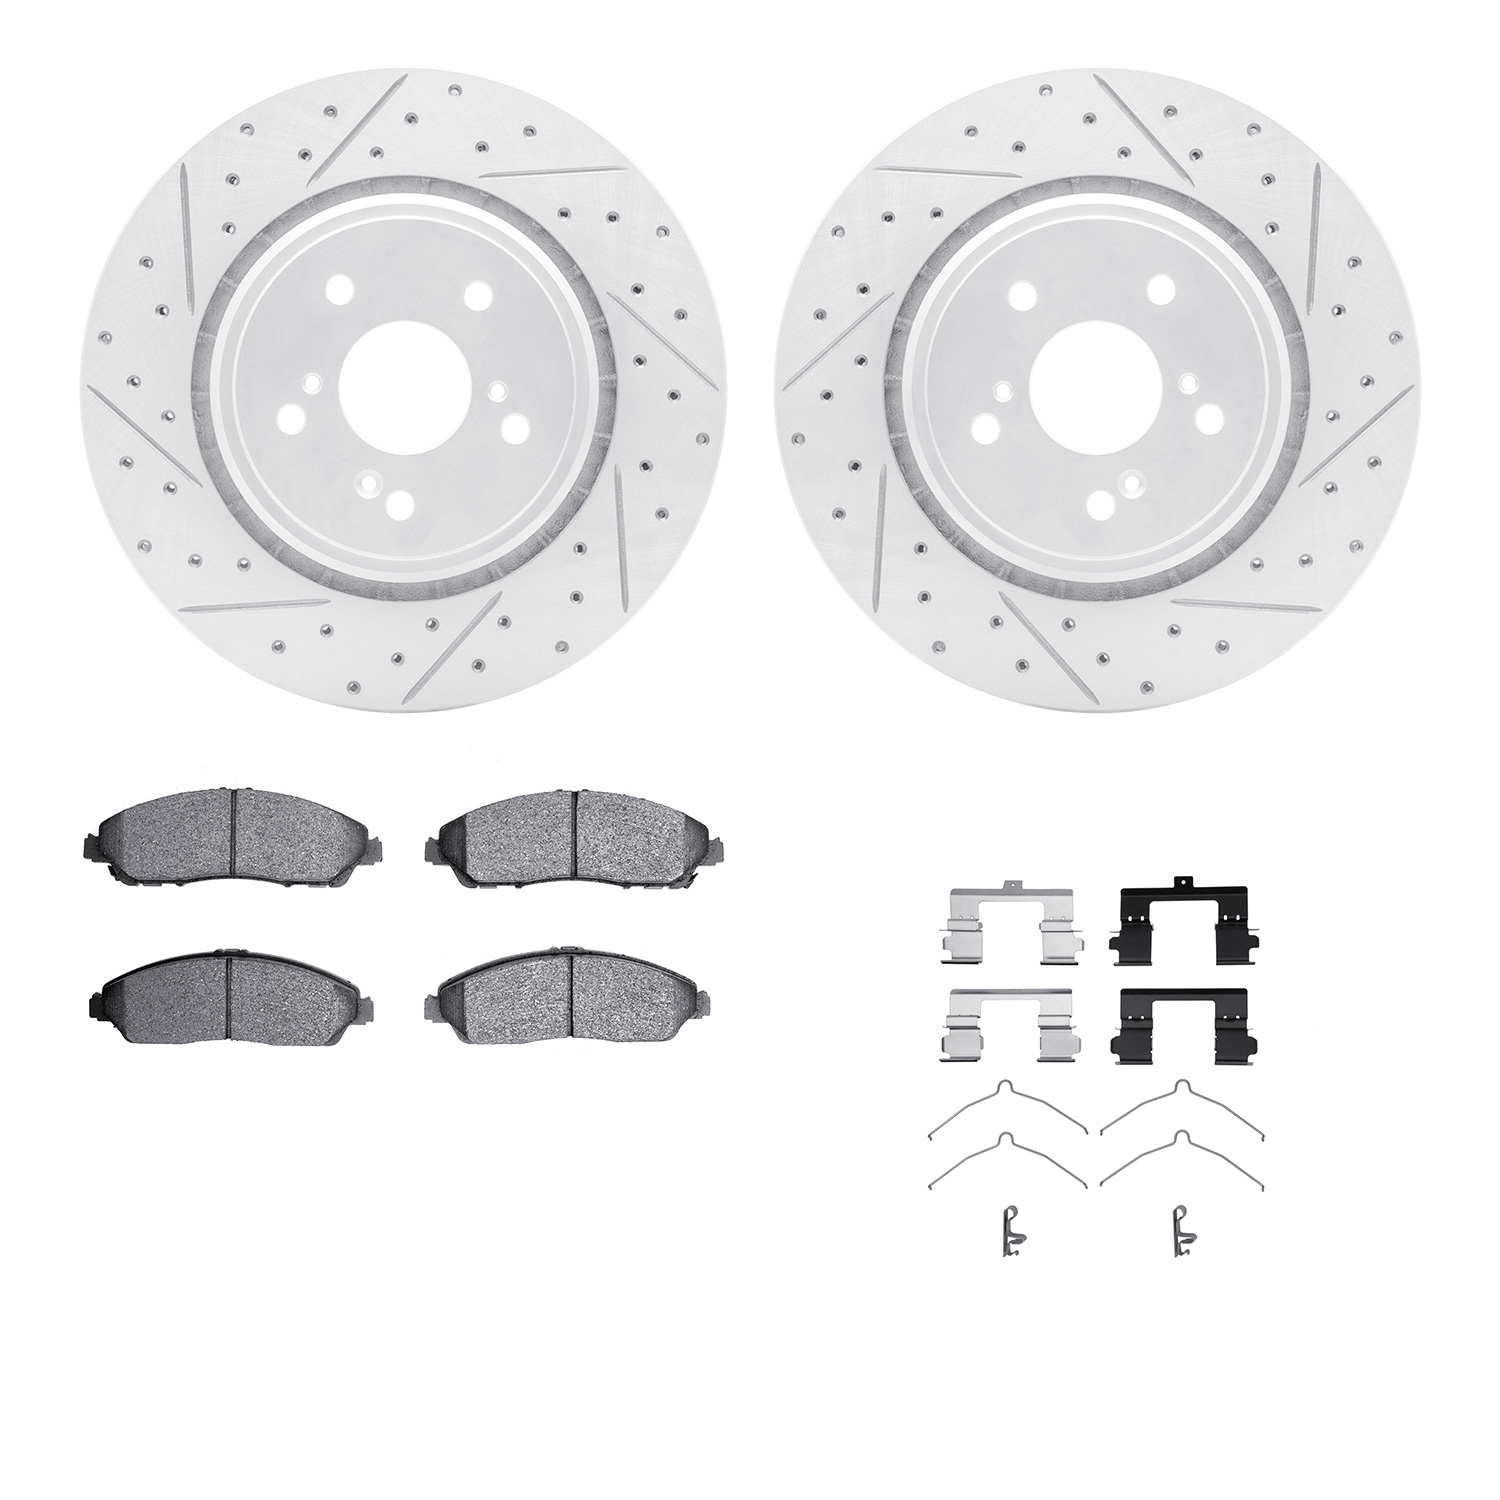 2512-58032 Geoperformance Drilled/Slotted Rotors w/5000 Advanced Brake Pads Kit & Hardware, 2014-2016 Acura/Honda, Position: Fro